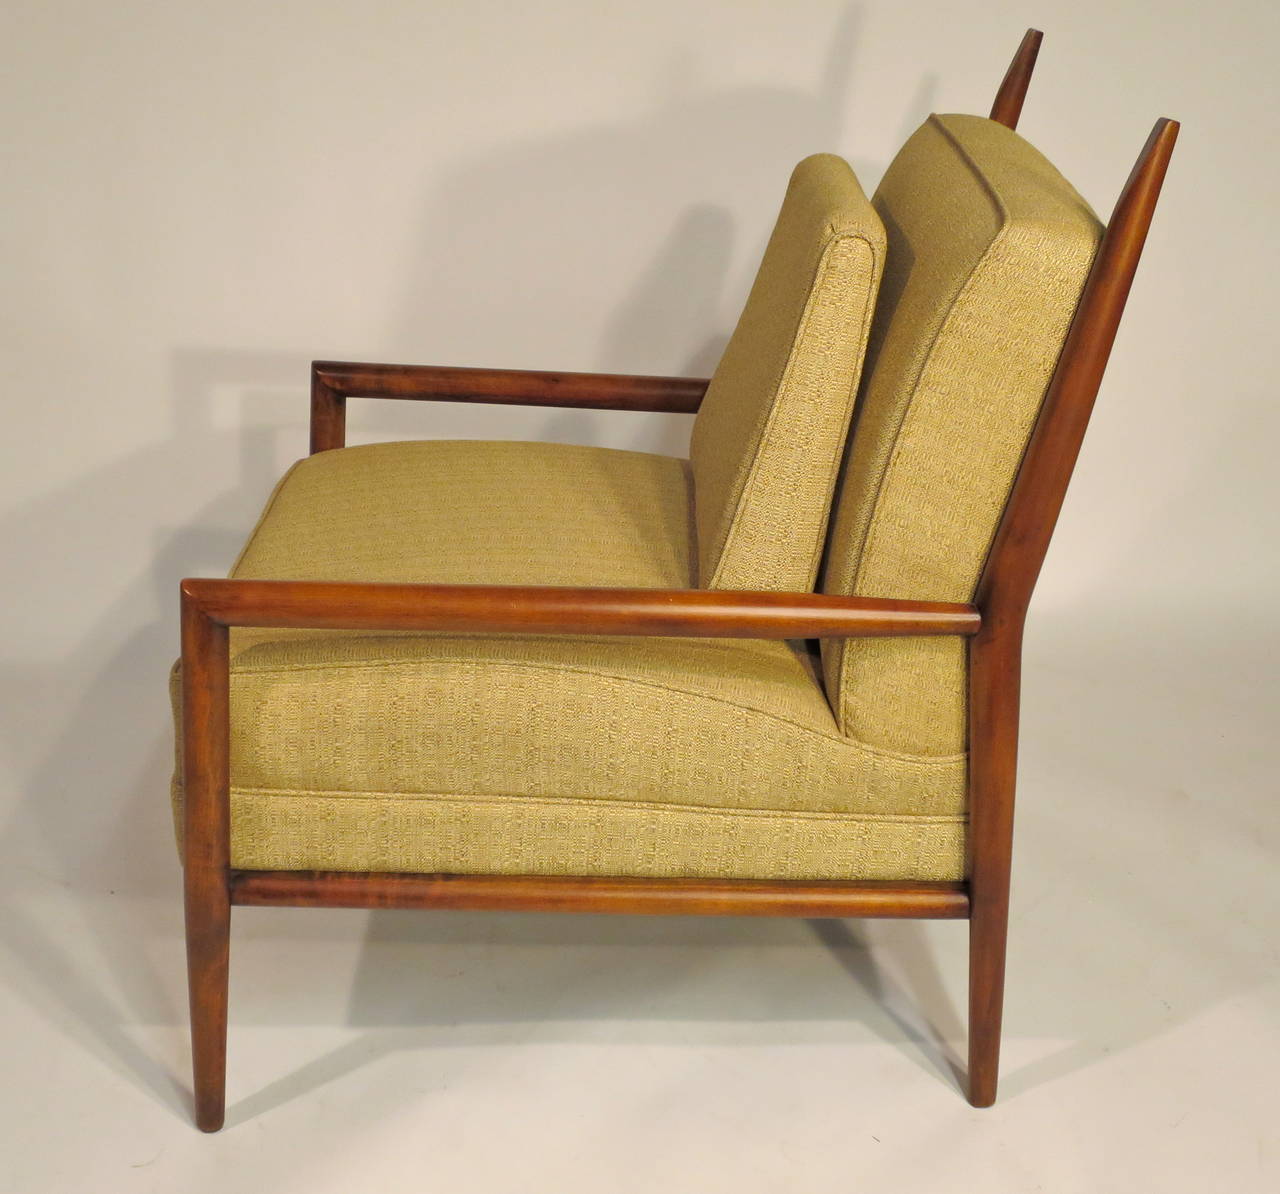 Rare Paul McCobb 3081-E lounge chair. Recently reupholstered, circa early 1950s.